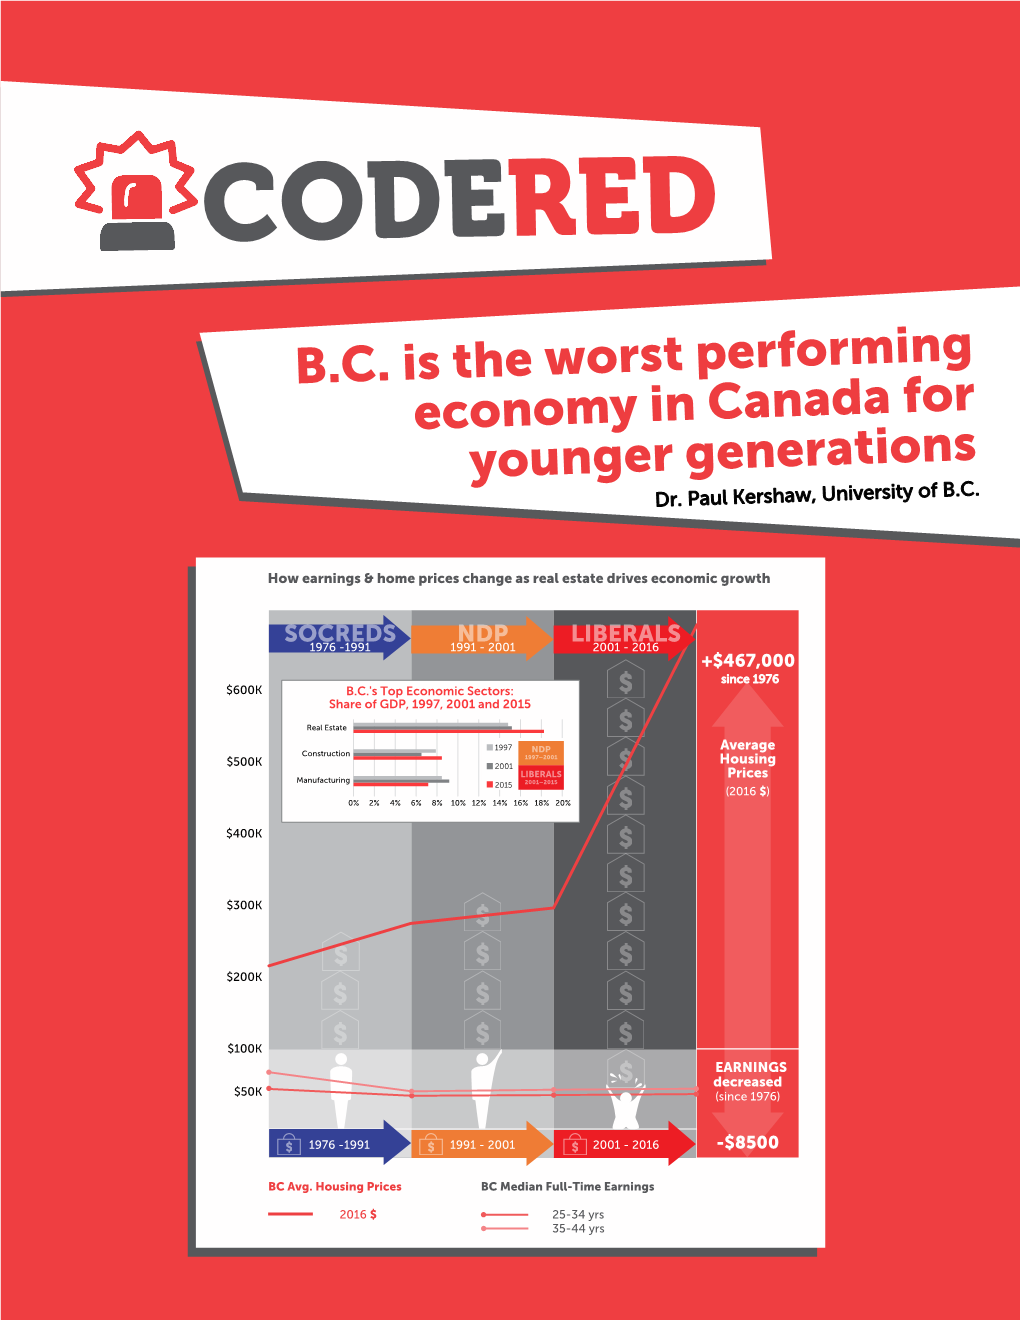 B.C. Is the Worst Performing Economy in Canada for Younger Generations." Vancouver, B.C.: Generation Squeeze